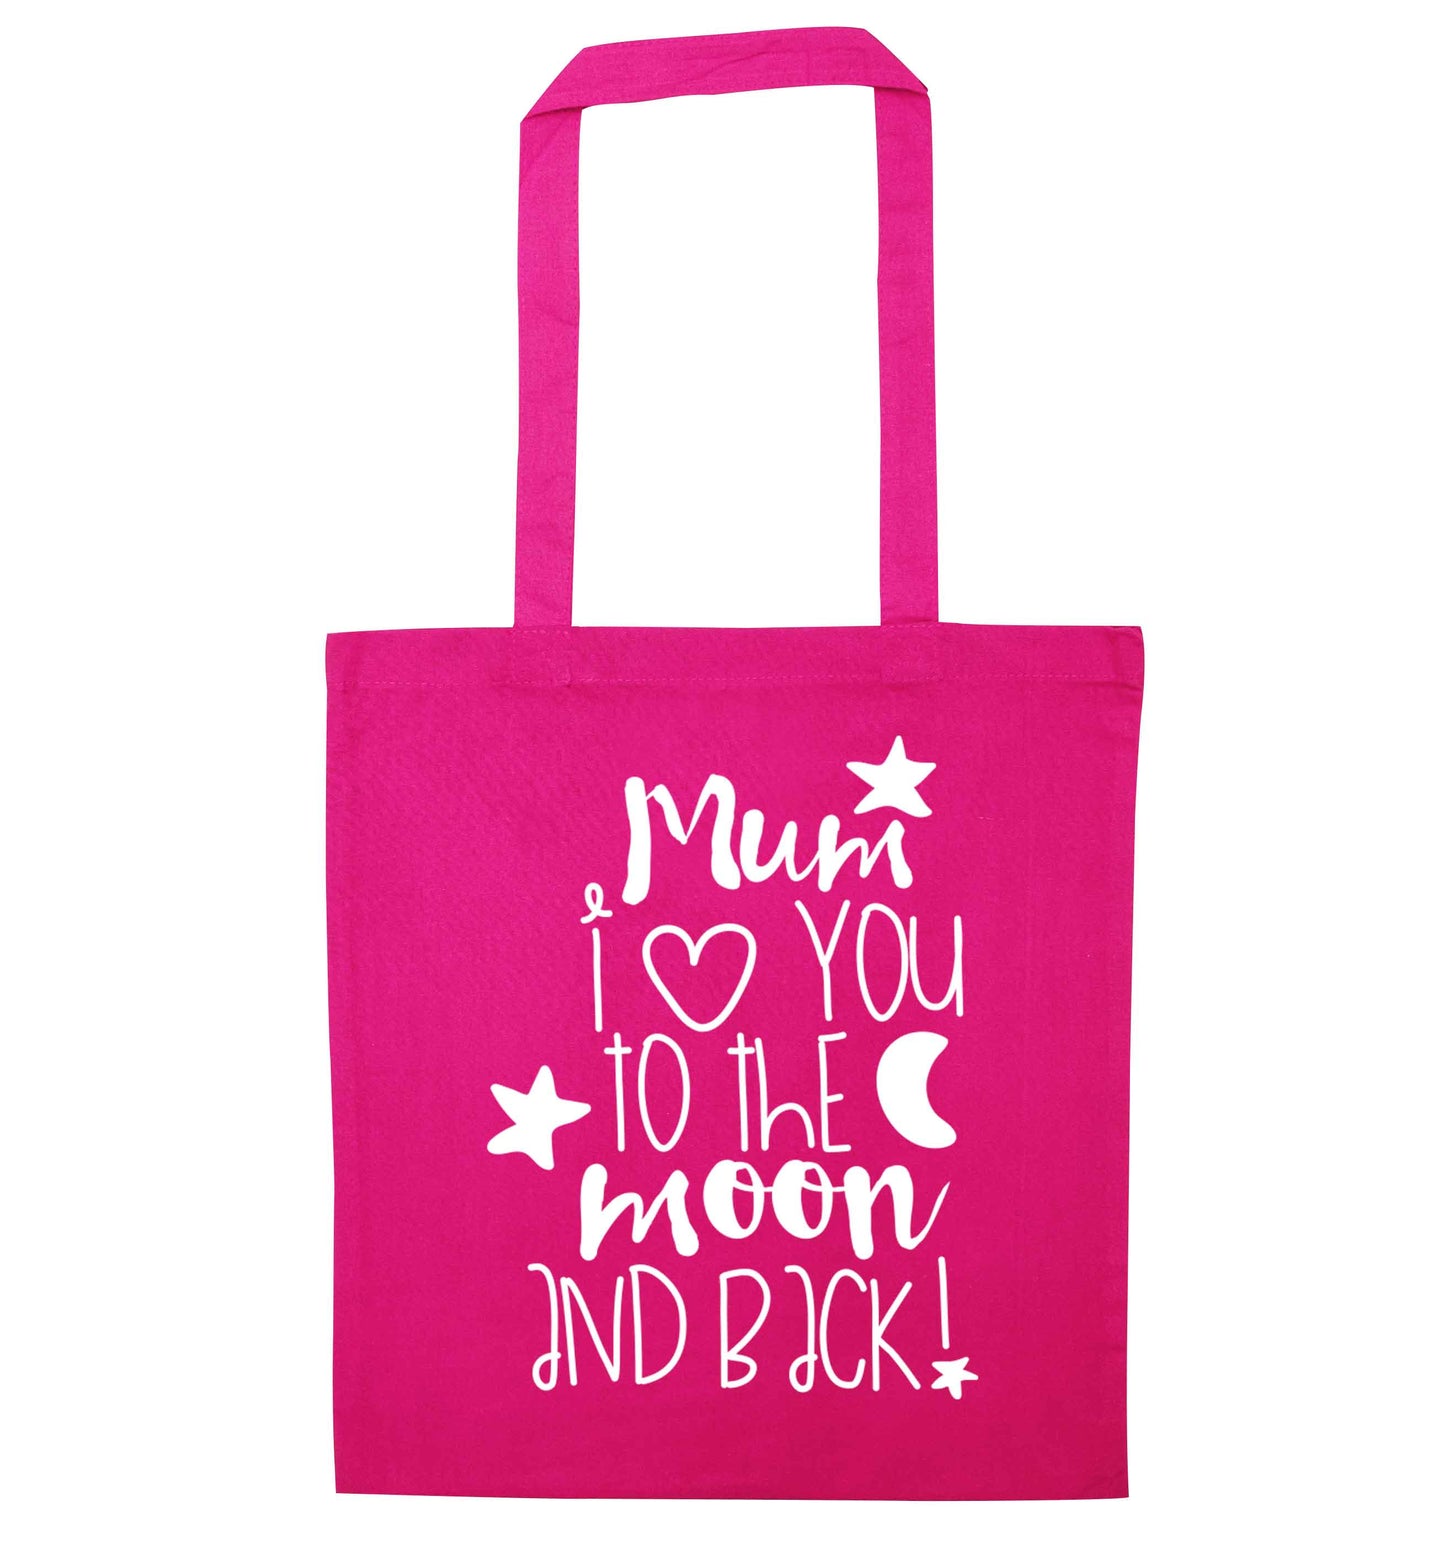 Mum I love you to the moon and back pink tote bag